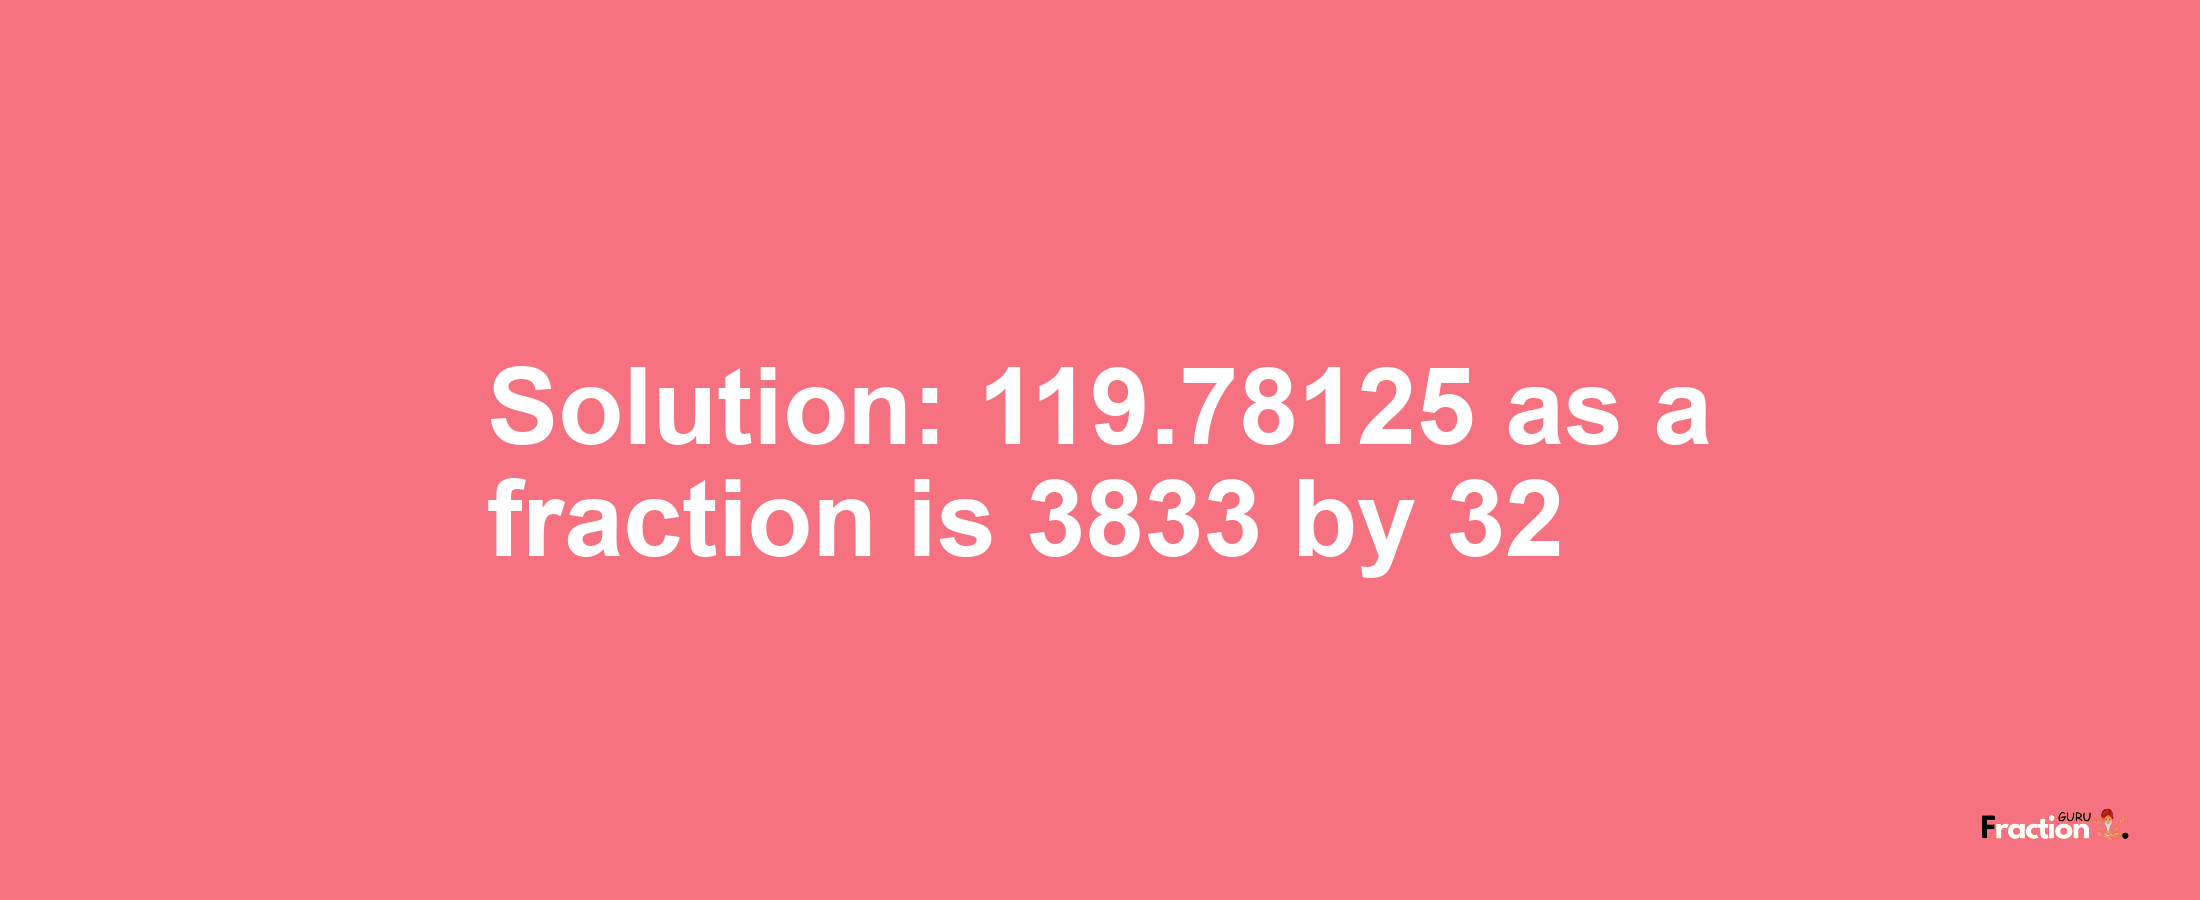 Solution:119.78125 as a fraction is 3833/32